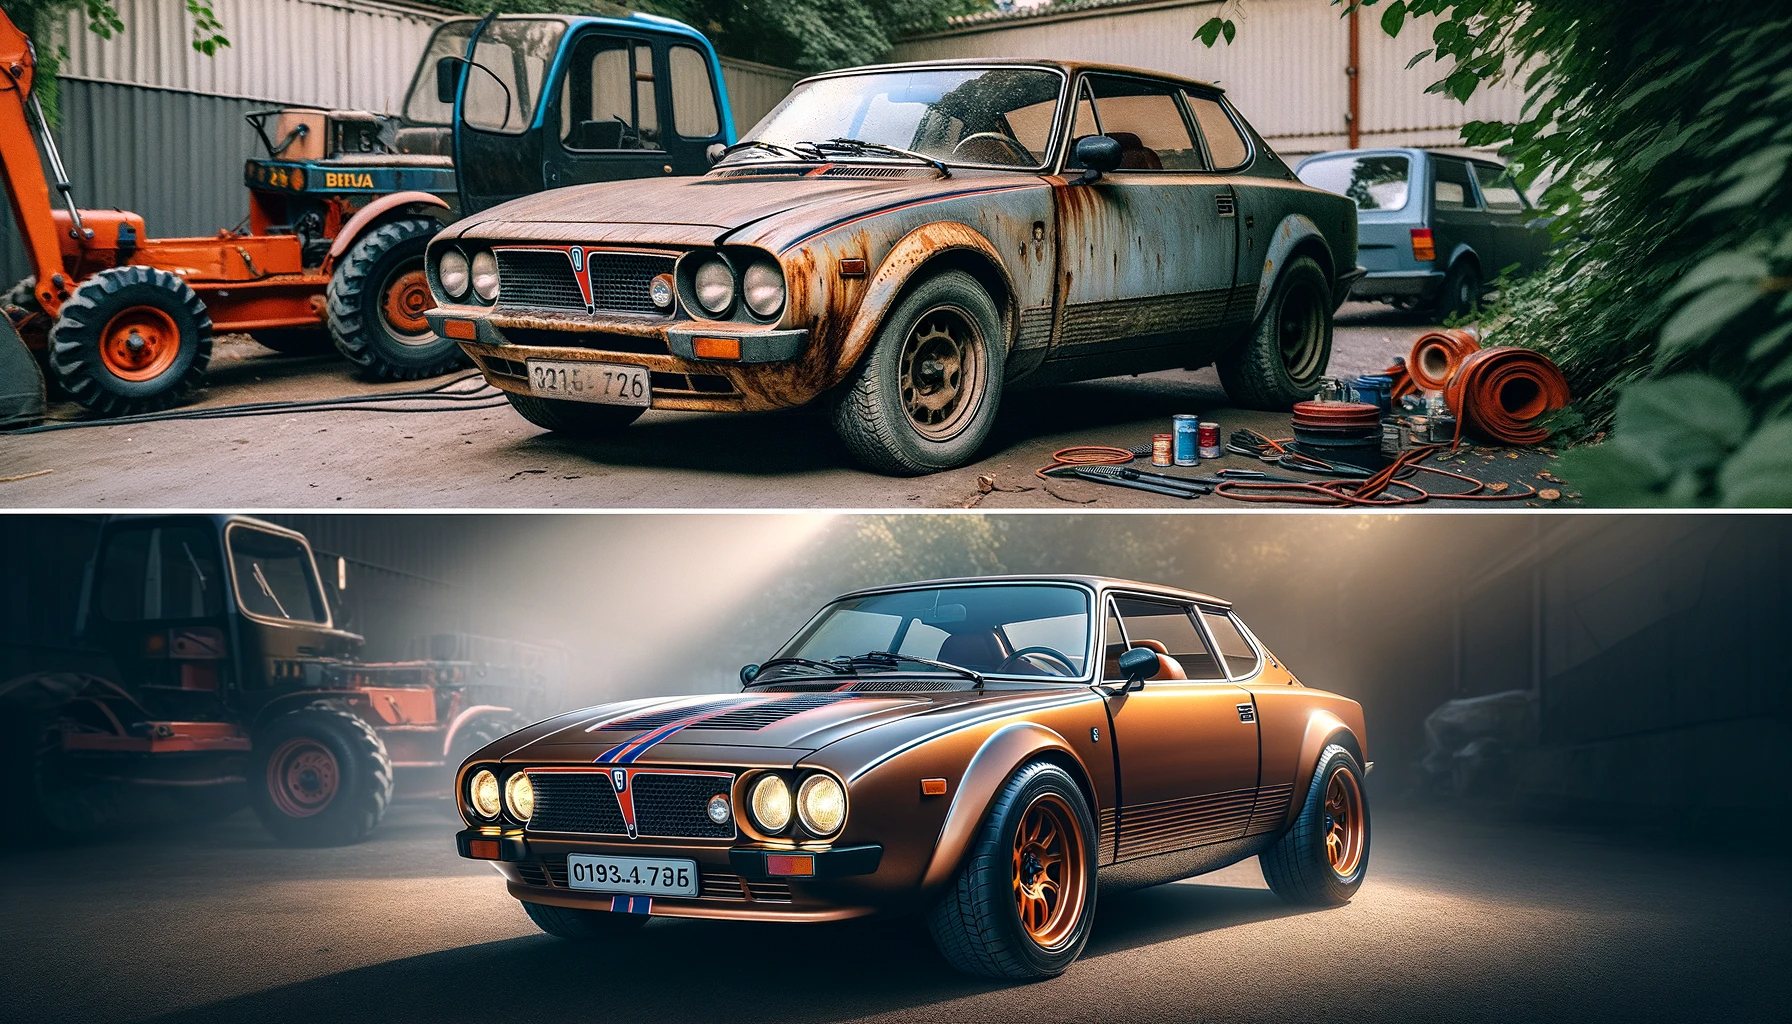 A series of before and after photos of the 1977 Lancia Scorpion